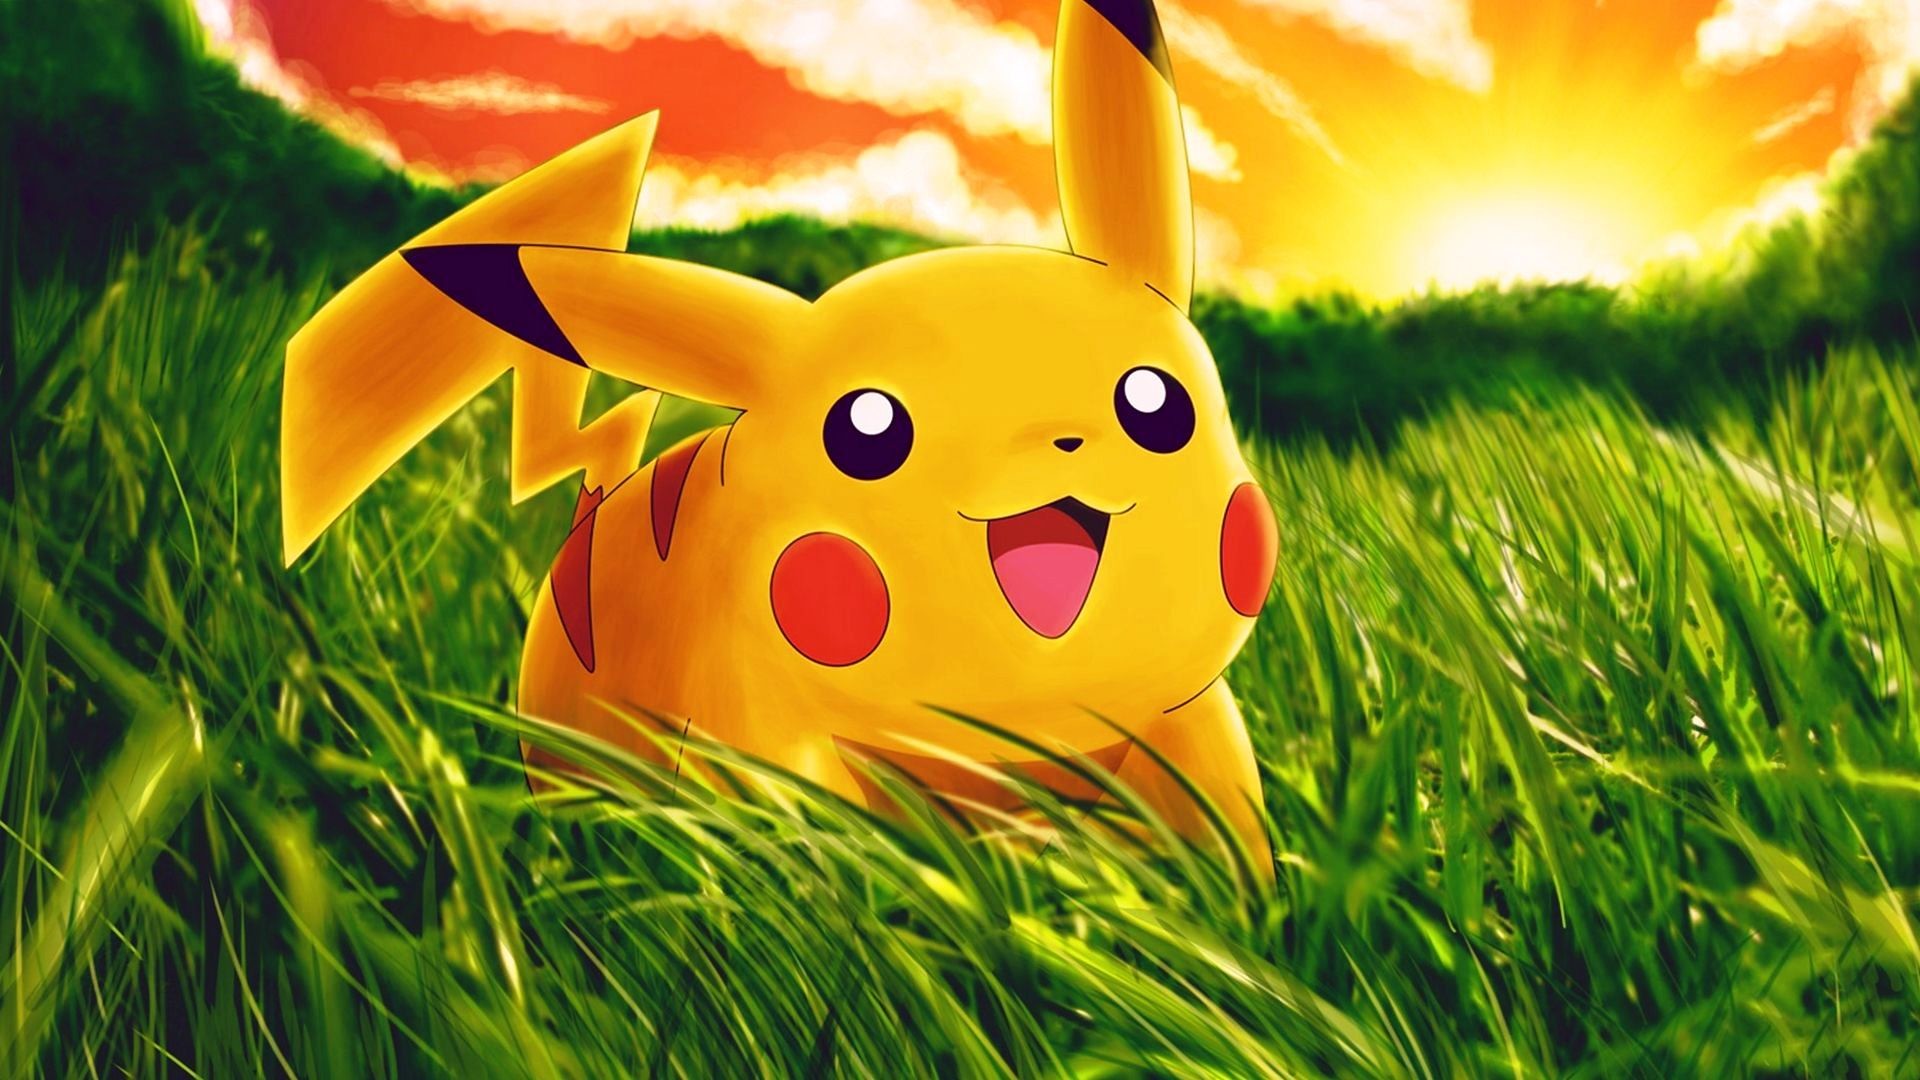 1920x1080 Search Results for “pikachu cartoon wallpaper” – Adorable Wallpapers